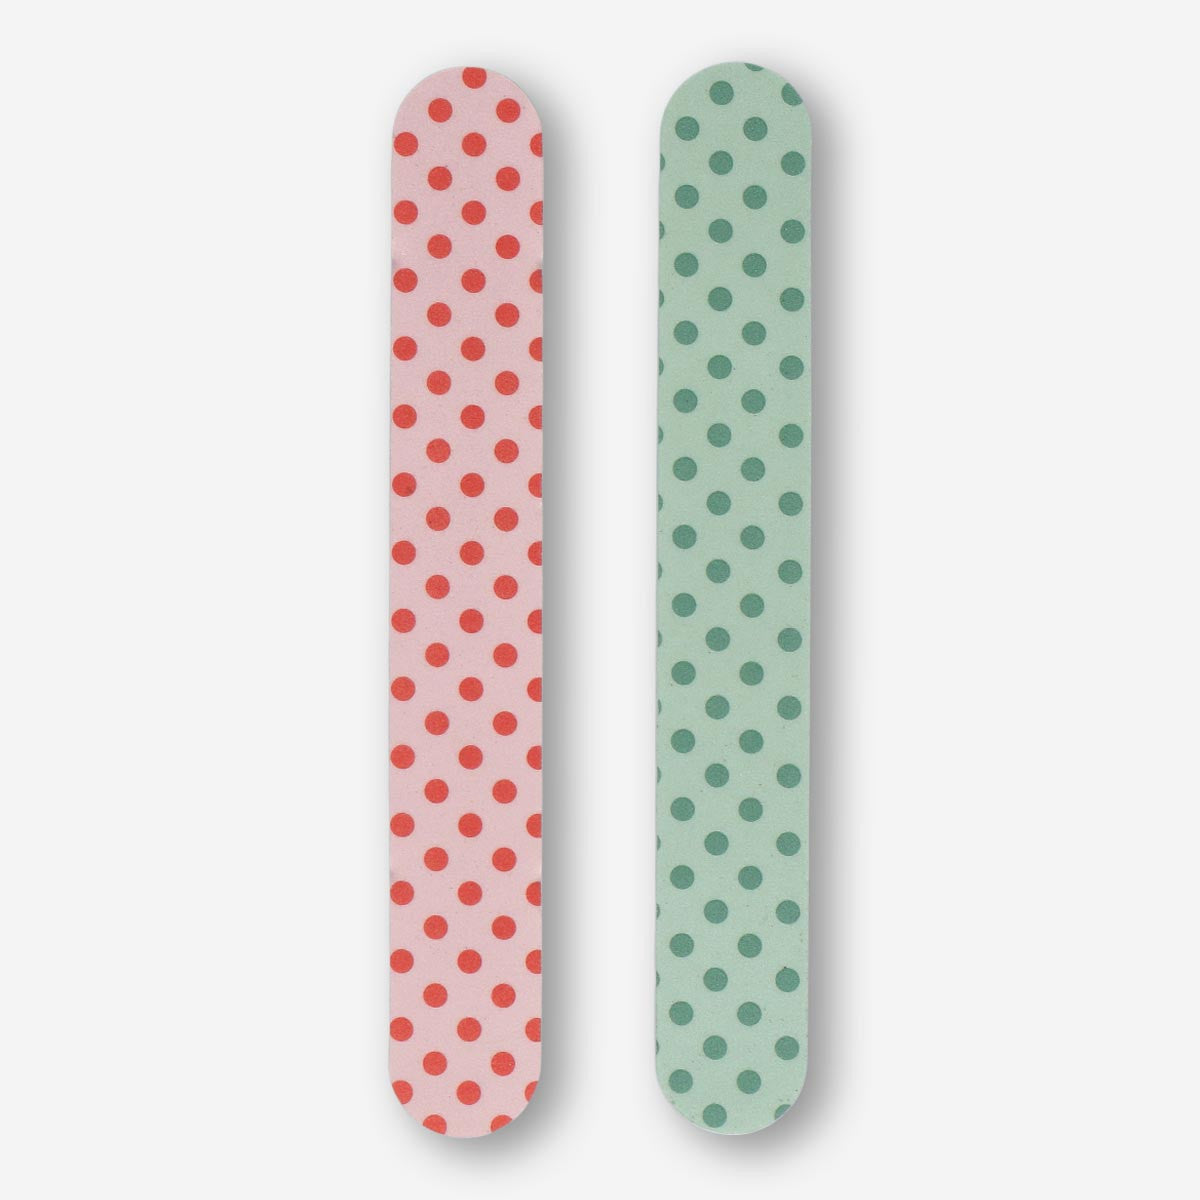 Nail files Personal care Flying Tiger Copenhagen 